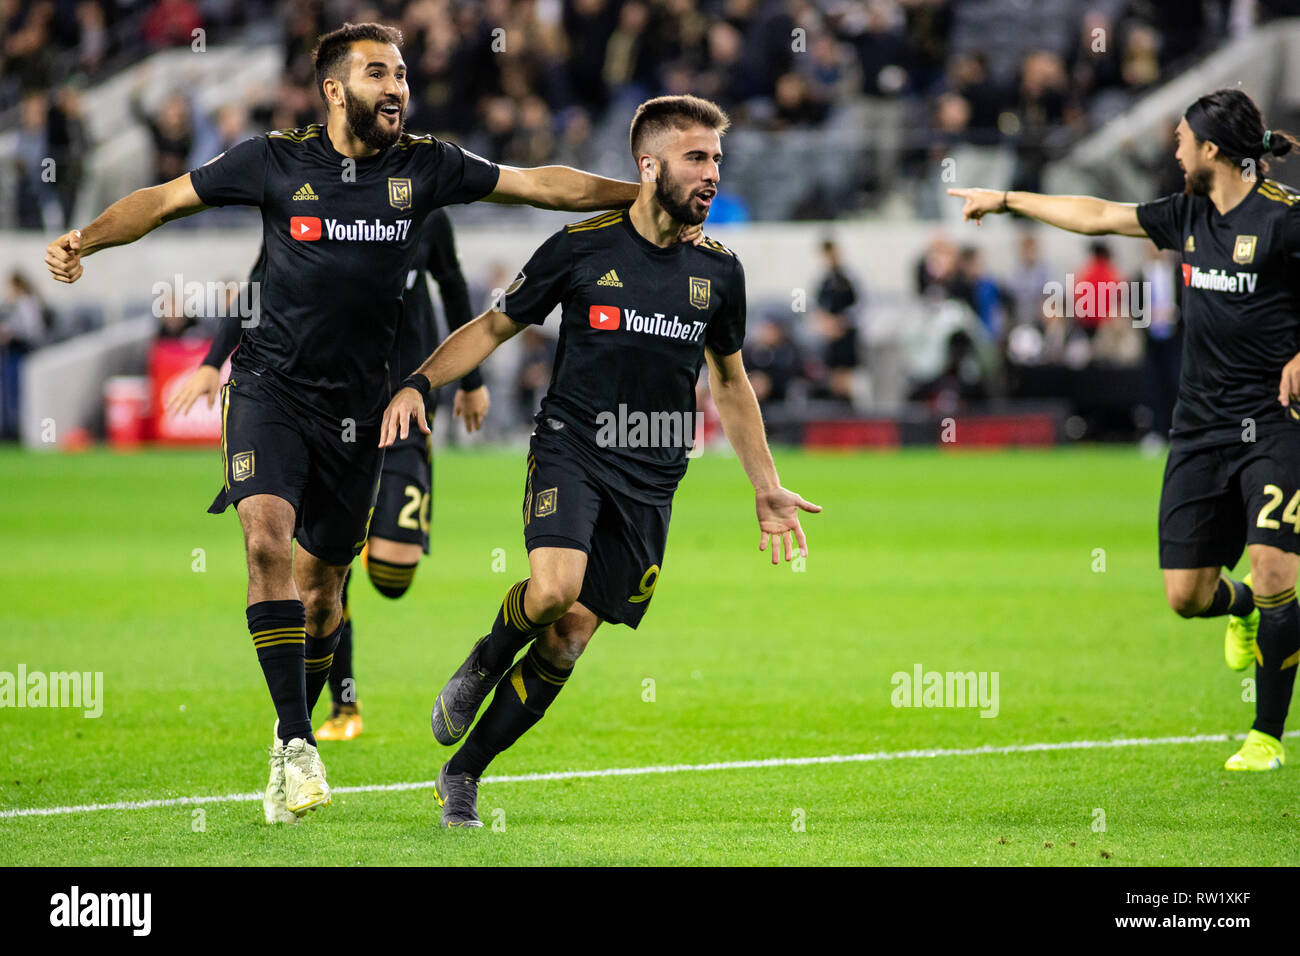 Los Angeles, USA. 3rd March, 2019. Diego Rossi (9) celebrates after scoring LAFC's first goal of the game and first goal of their 2019 season. Credit: Ben Nichols/Alamy Live News Stock Photo